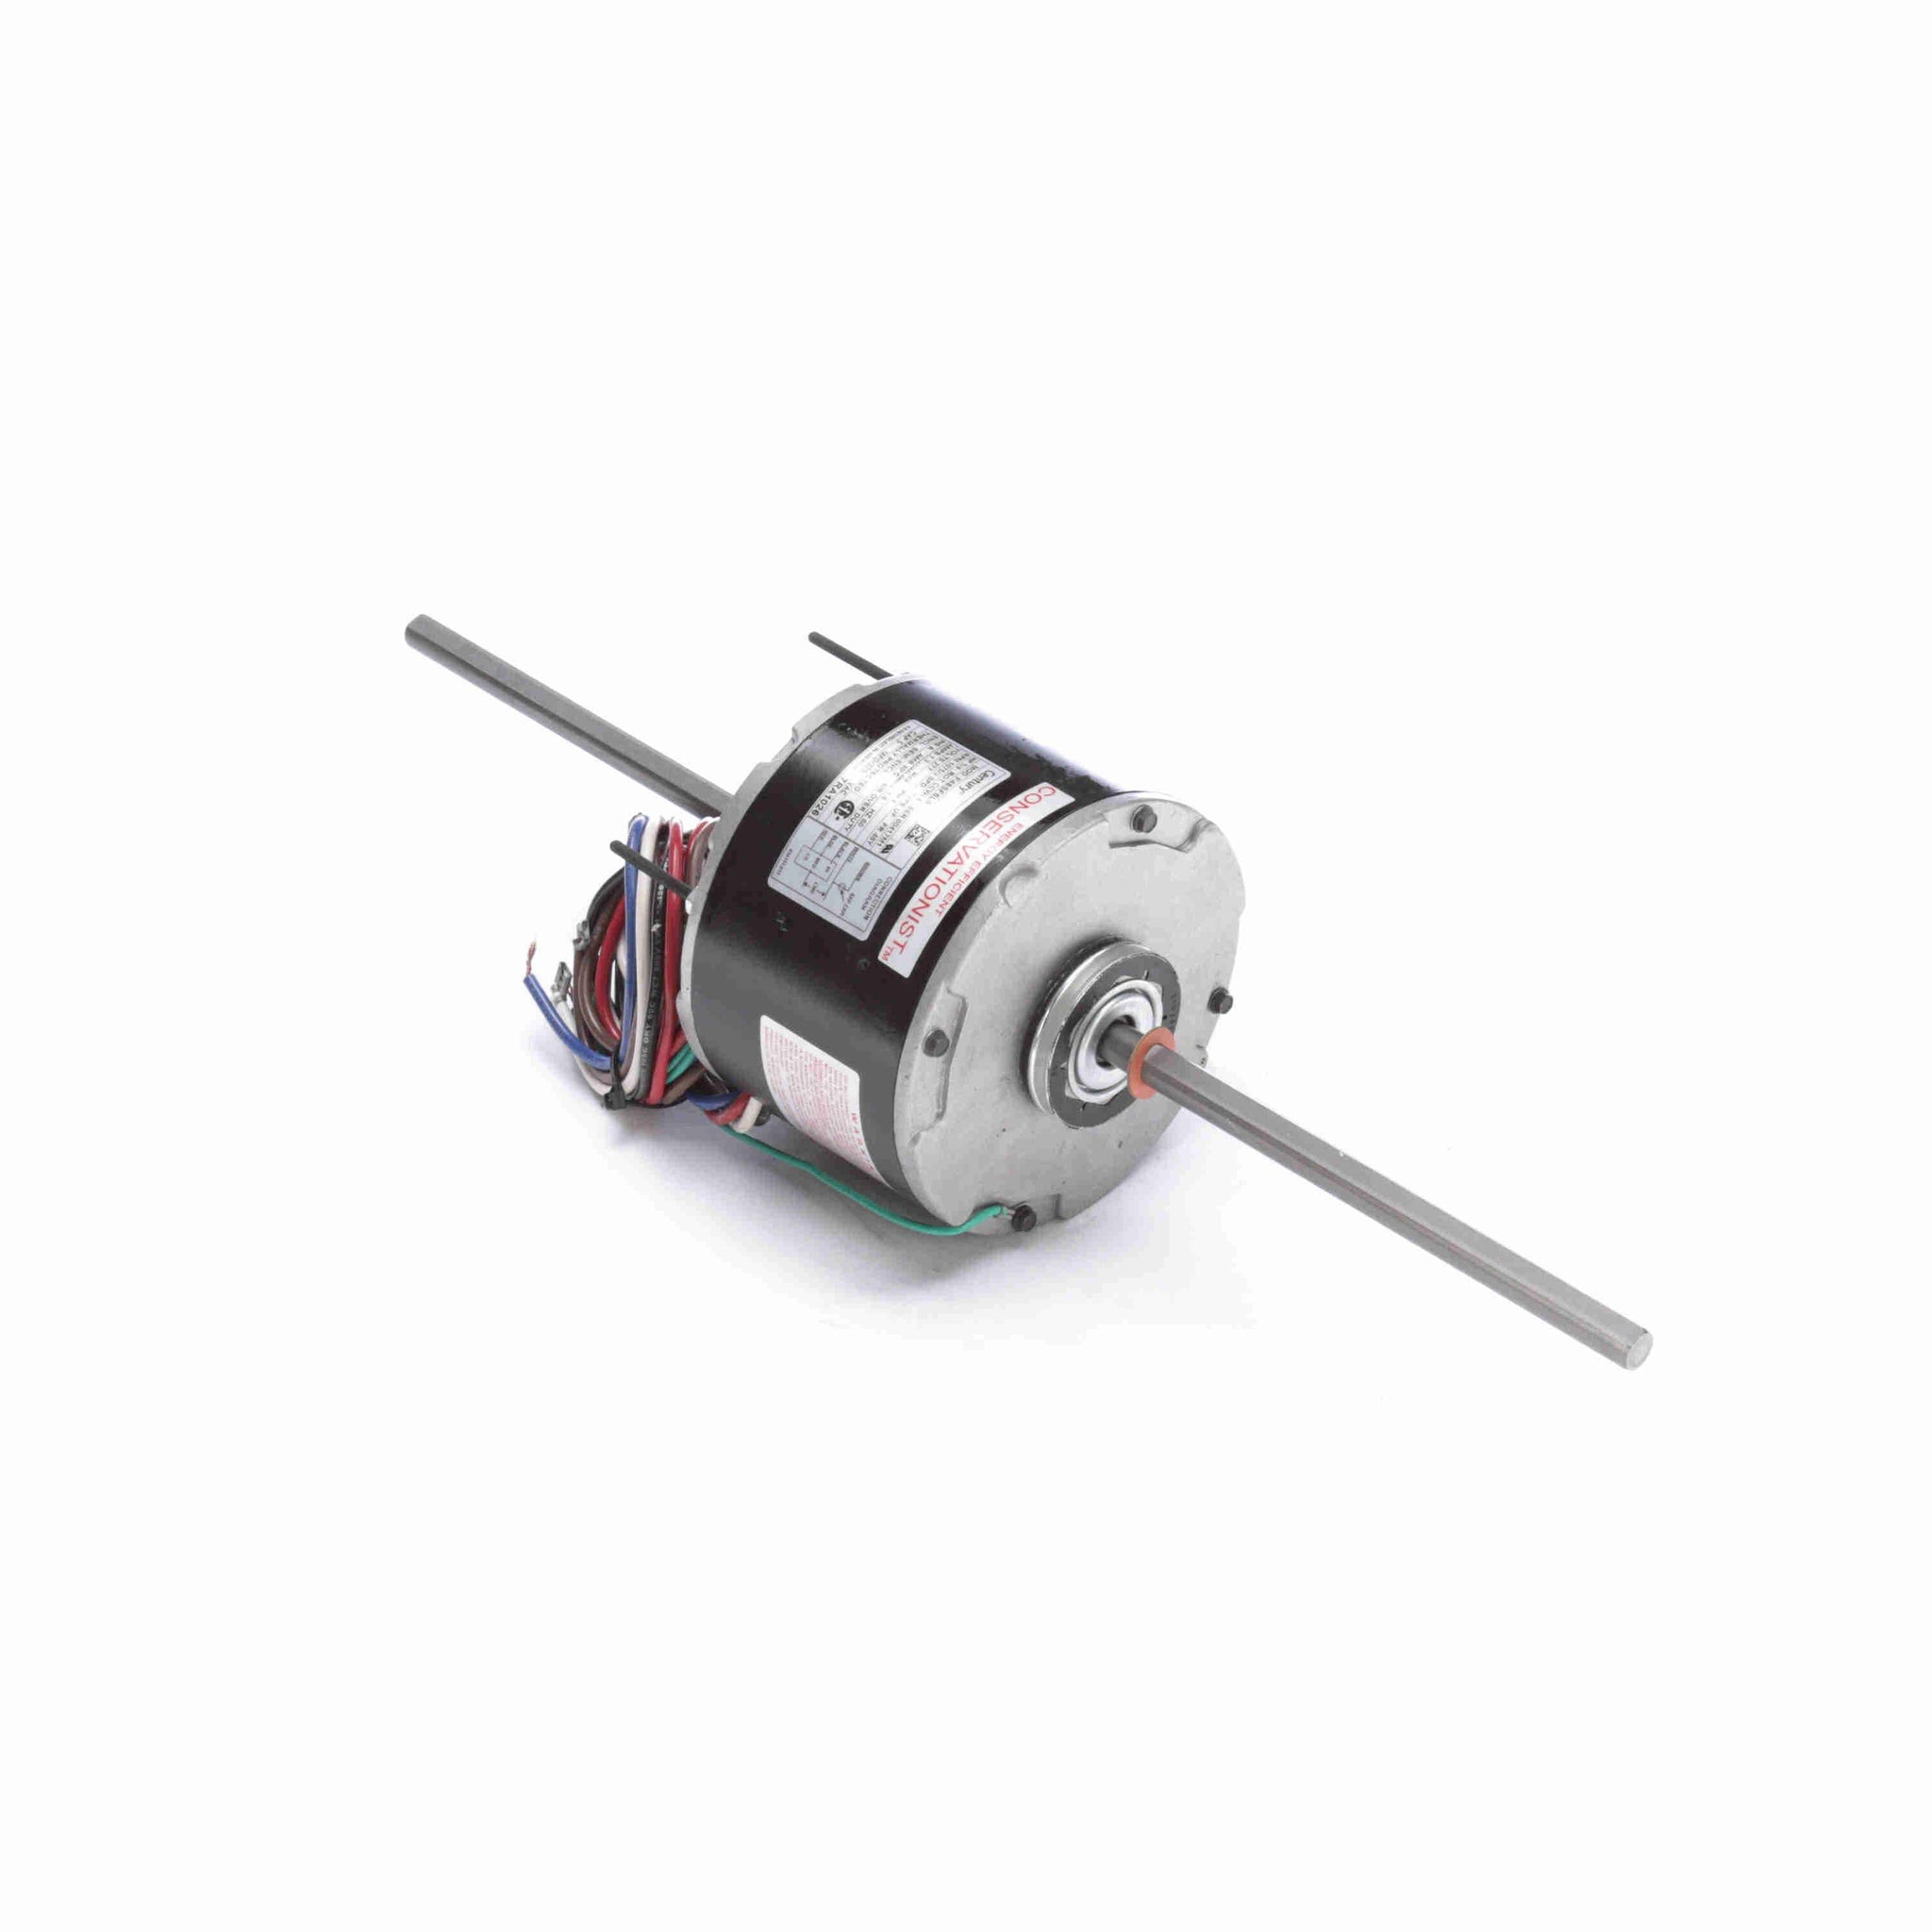 7RA1026 - 1/4 HP Fan Coil / Room Air Conditioner Motor, 1075 RPM, 3 Speed, 277 Volts, 48 Frame, Semi Enclosed - Hardware & Moreee